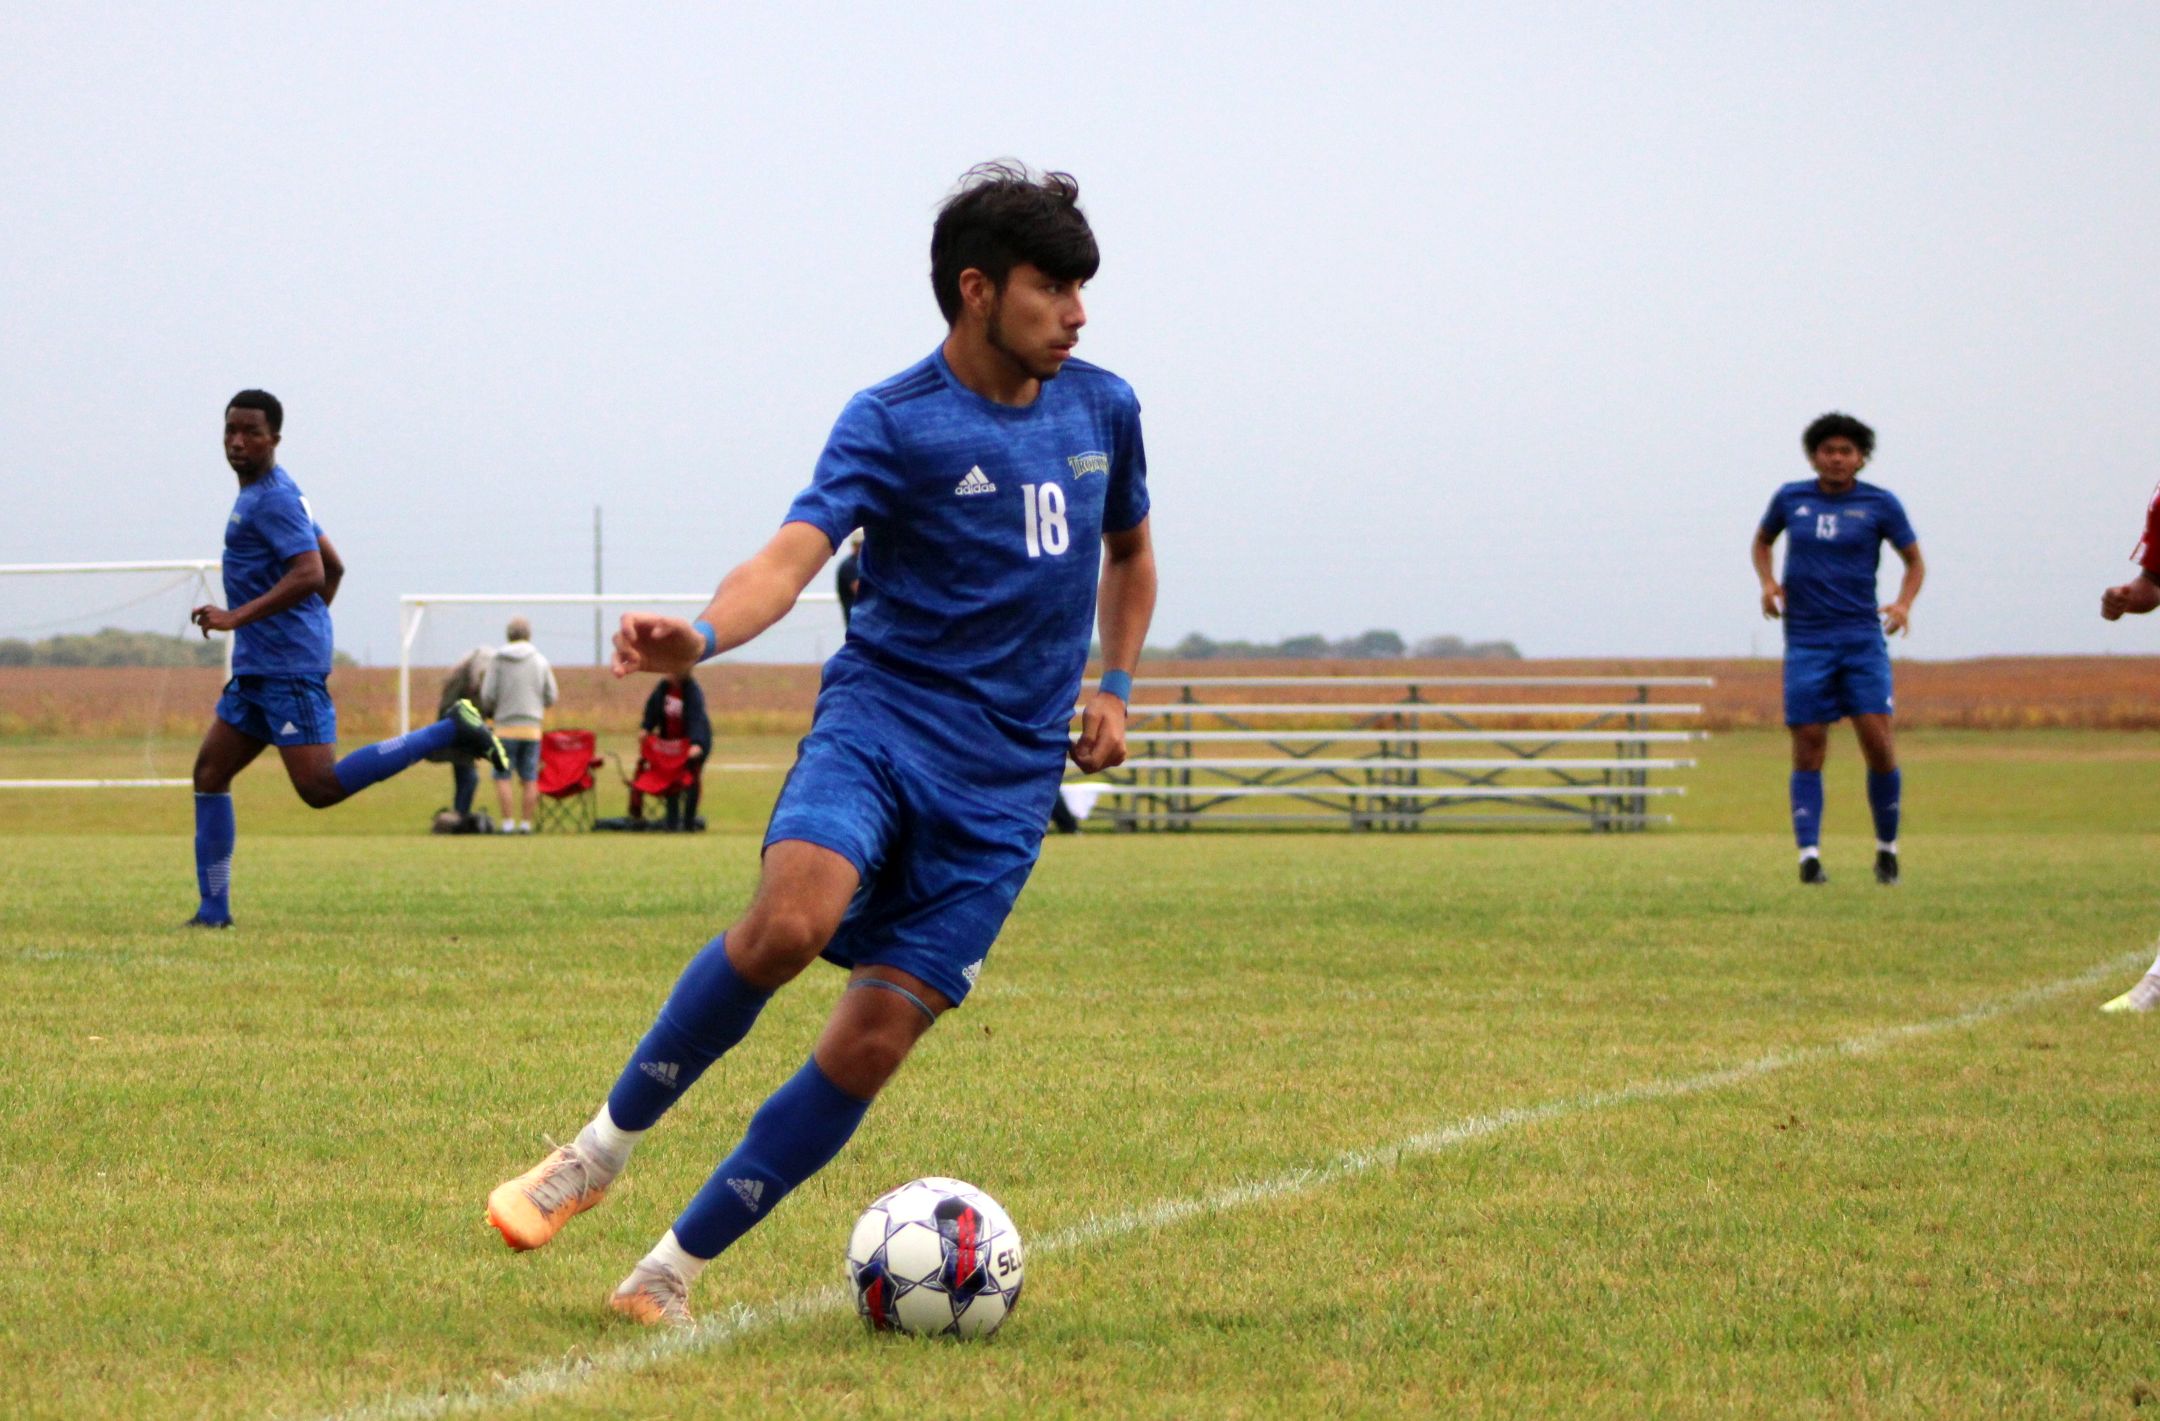 NIACC's Luis Montero moves the ball up the field in Saturday's match against Scott CC.